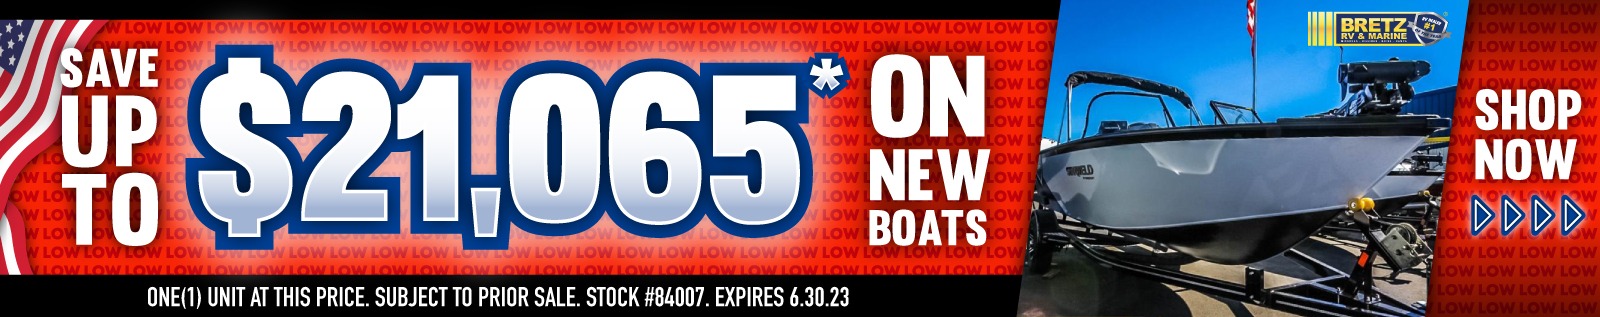 Save up to $50724 on new boats